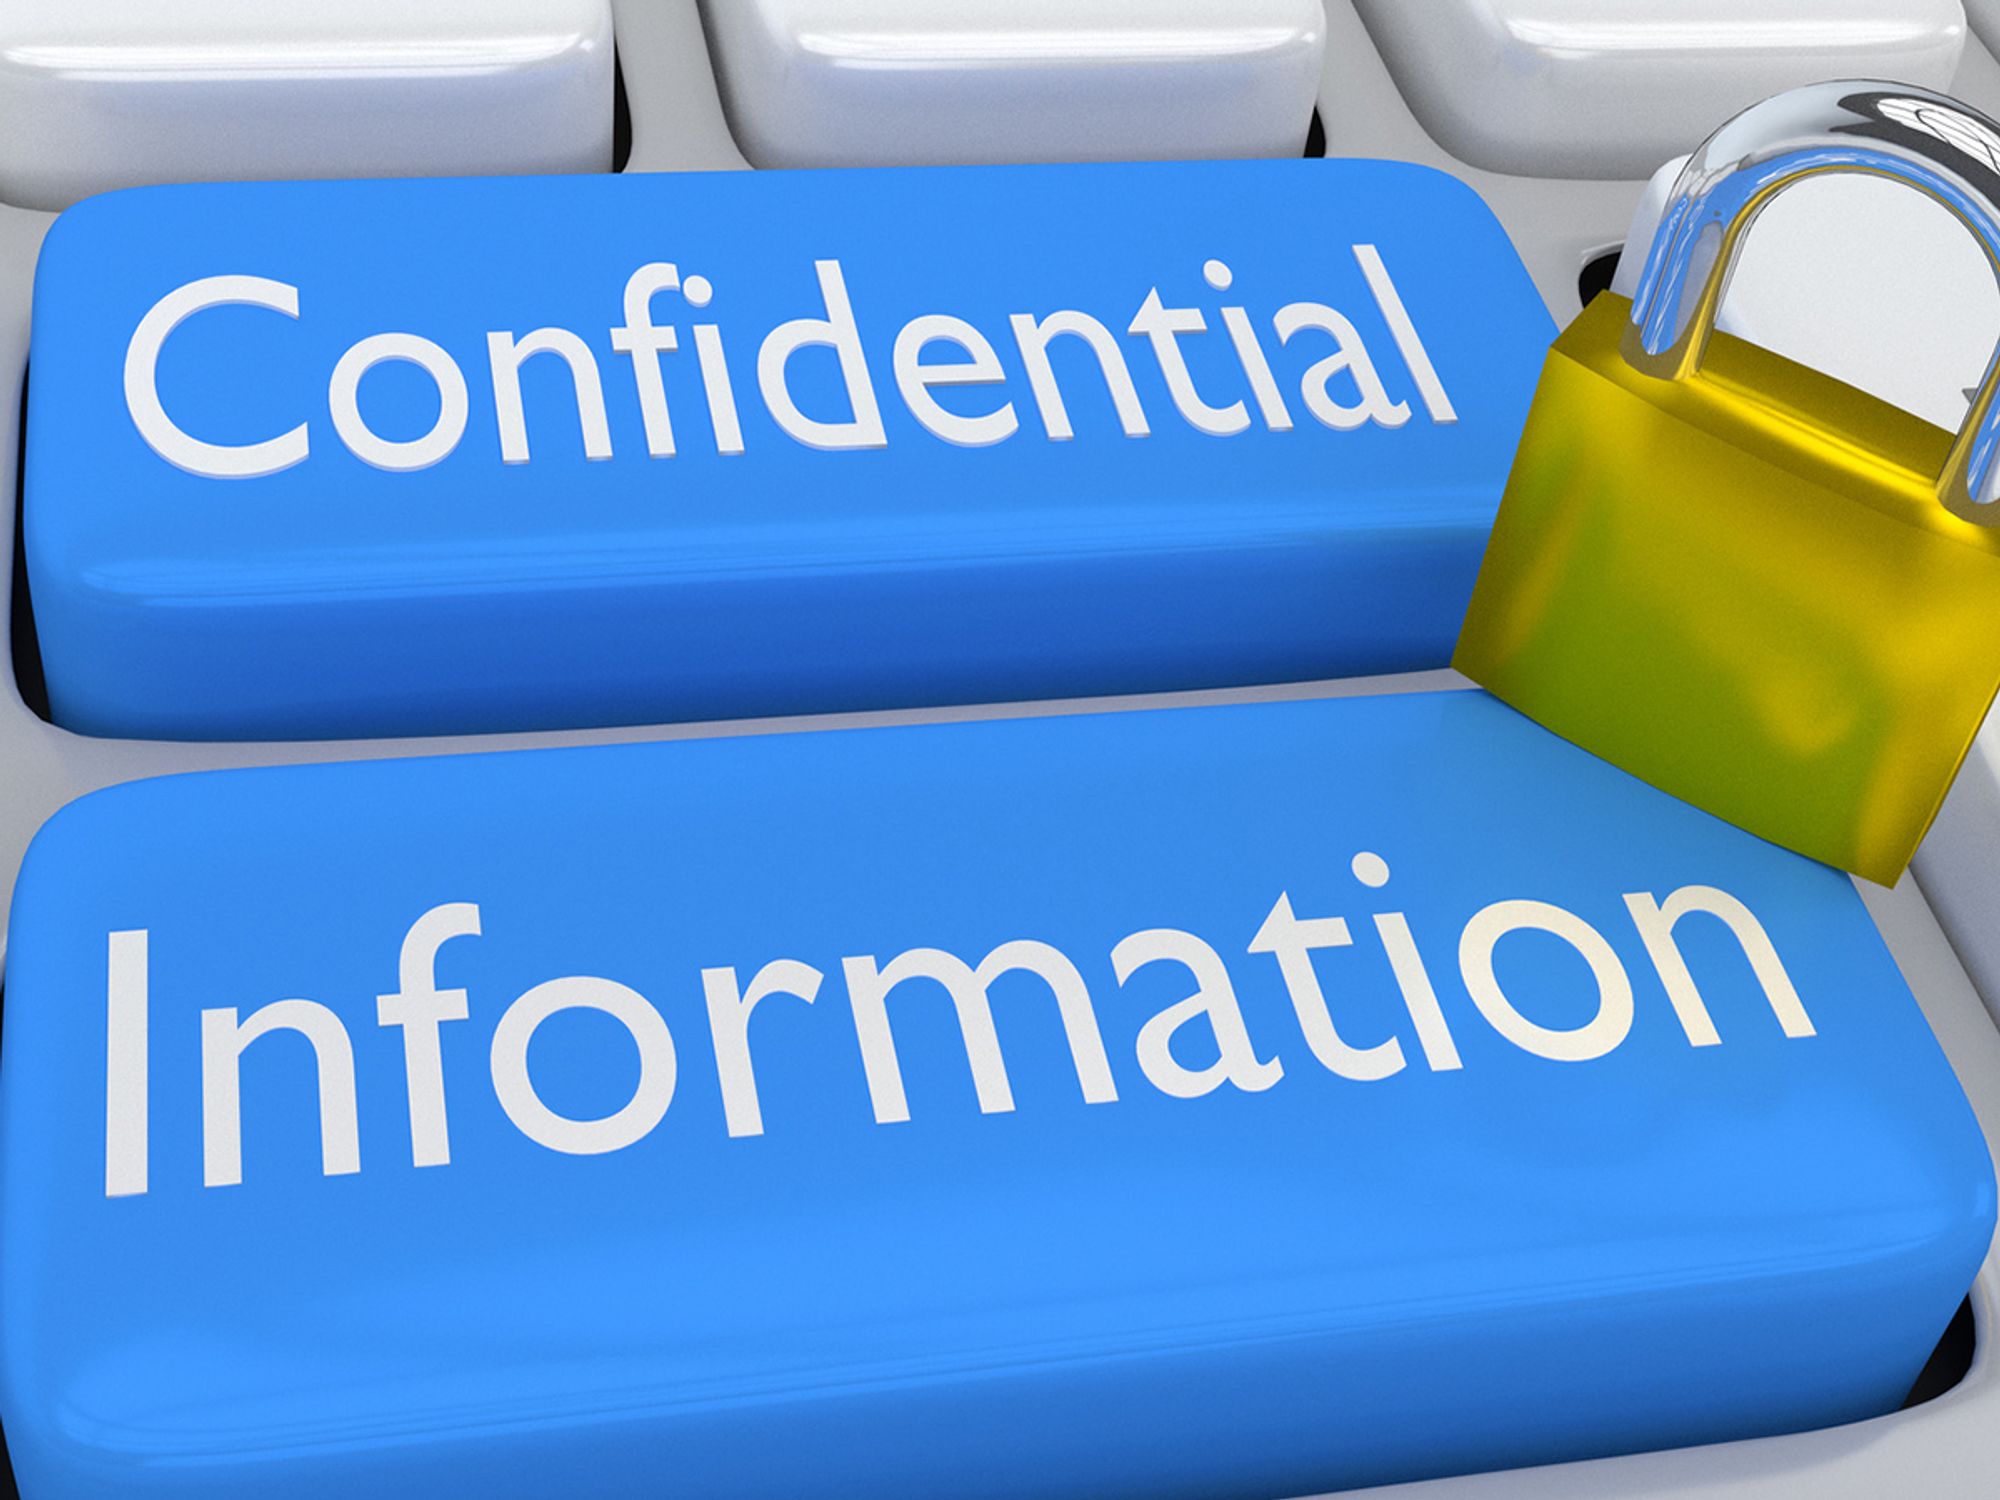 Confidential business information